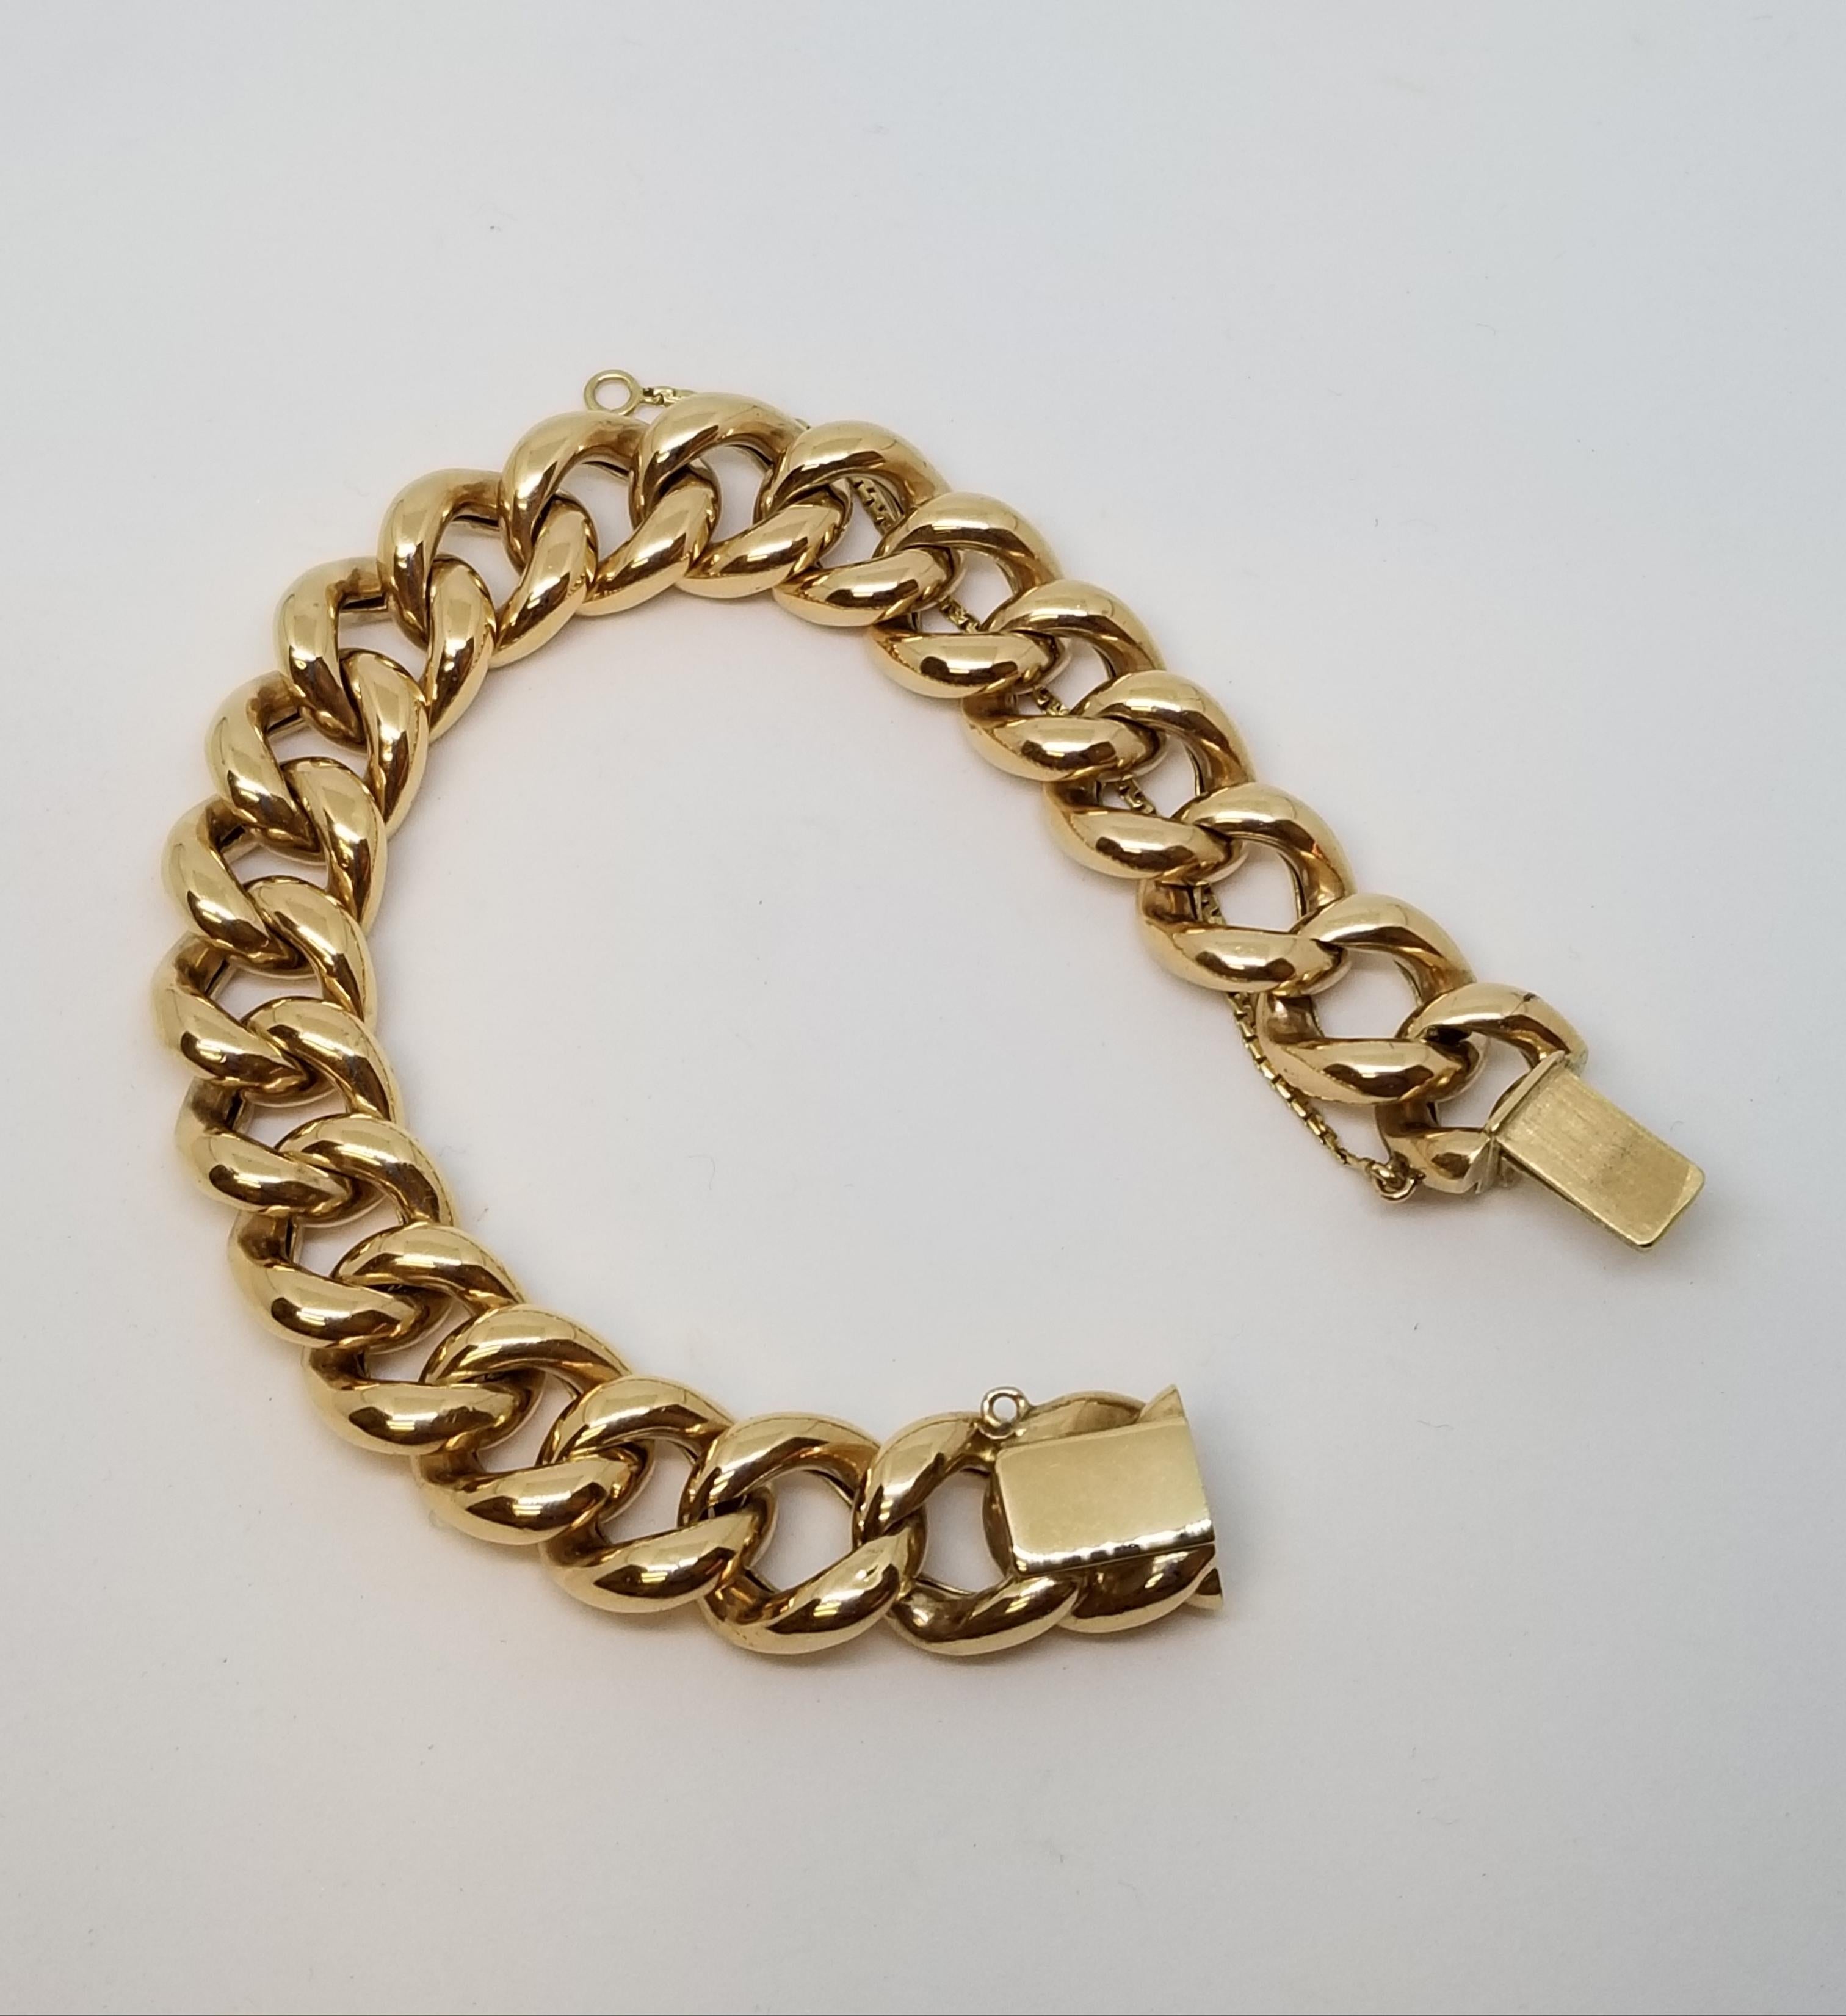 This 1930's European chain link 14 karat rose gold bracelet is an iconic wardrobe must have.  With a simple but chic personality, this 7 1/2